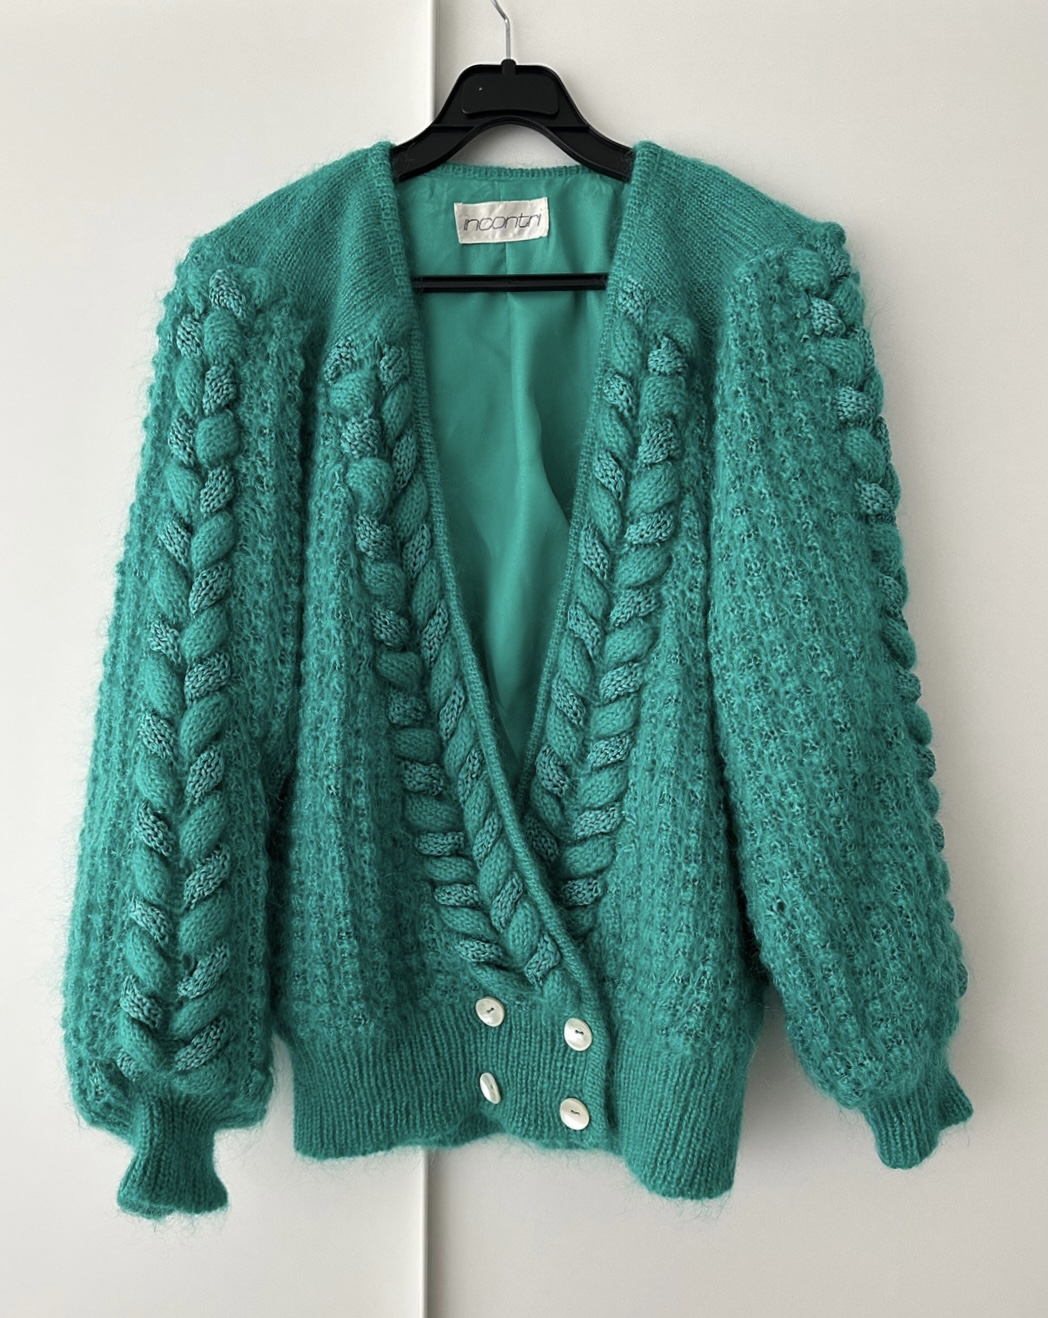 Turquoise green cable deep v-neck knit cardigan